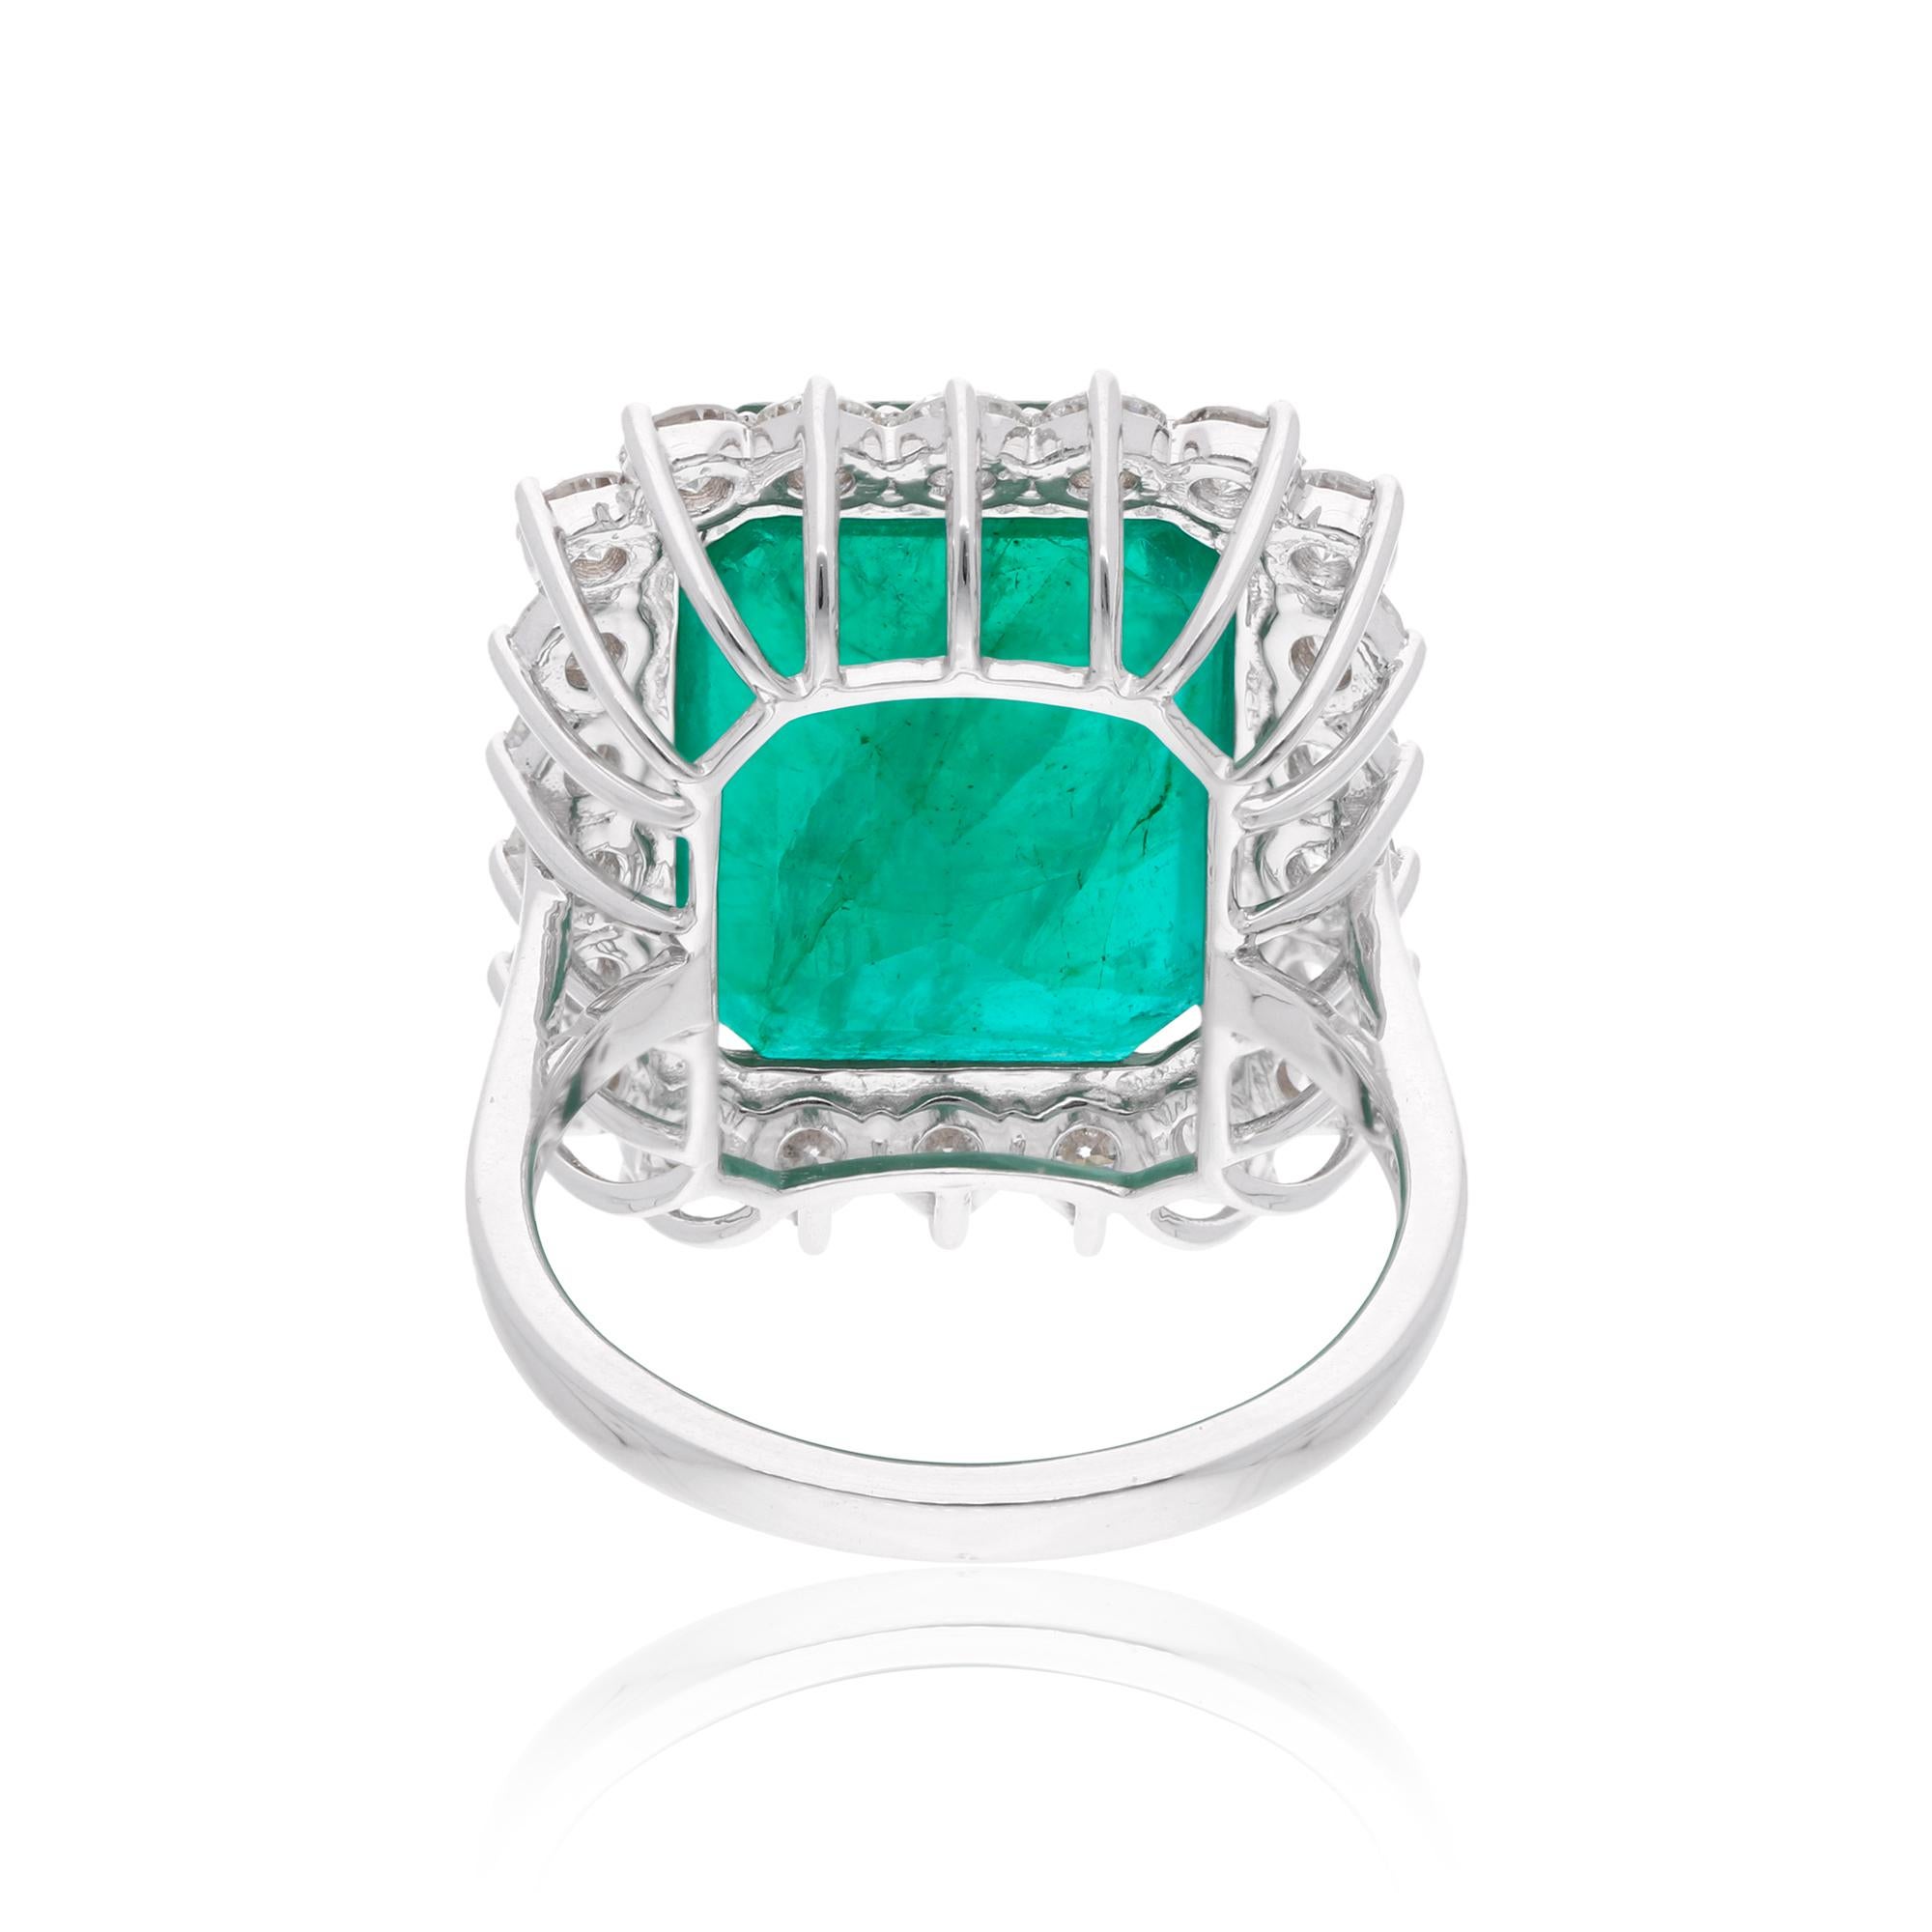 For Sale:  13.87 Total Carat Natural Emerald Gemstone Cocktail Ring Diamond 18k White Gold 5